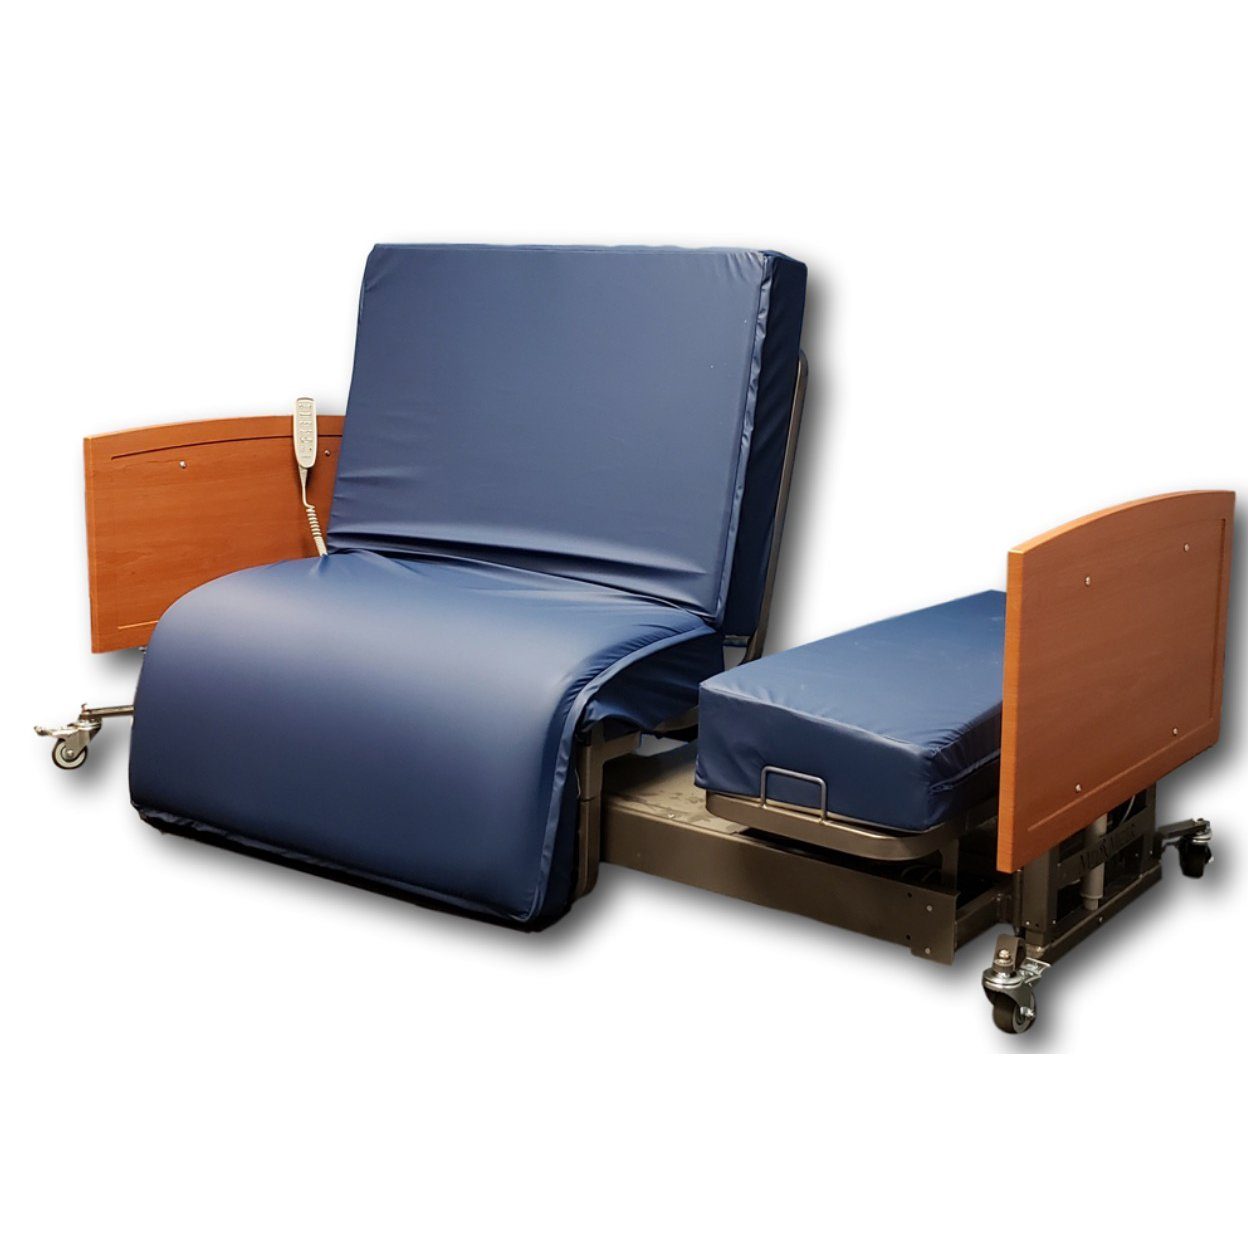 ActiveCare Hospital Bed